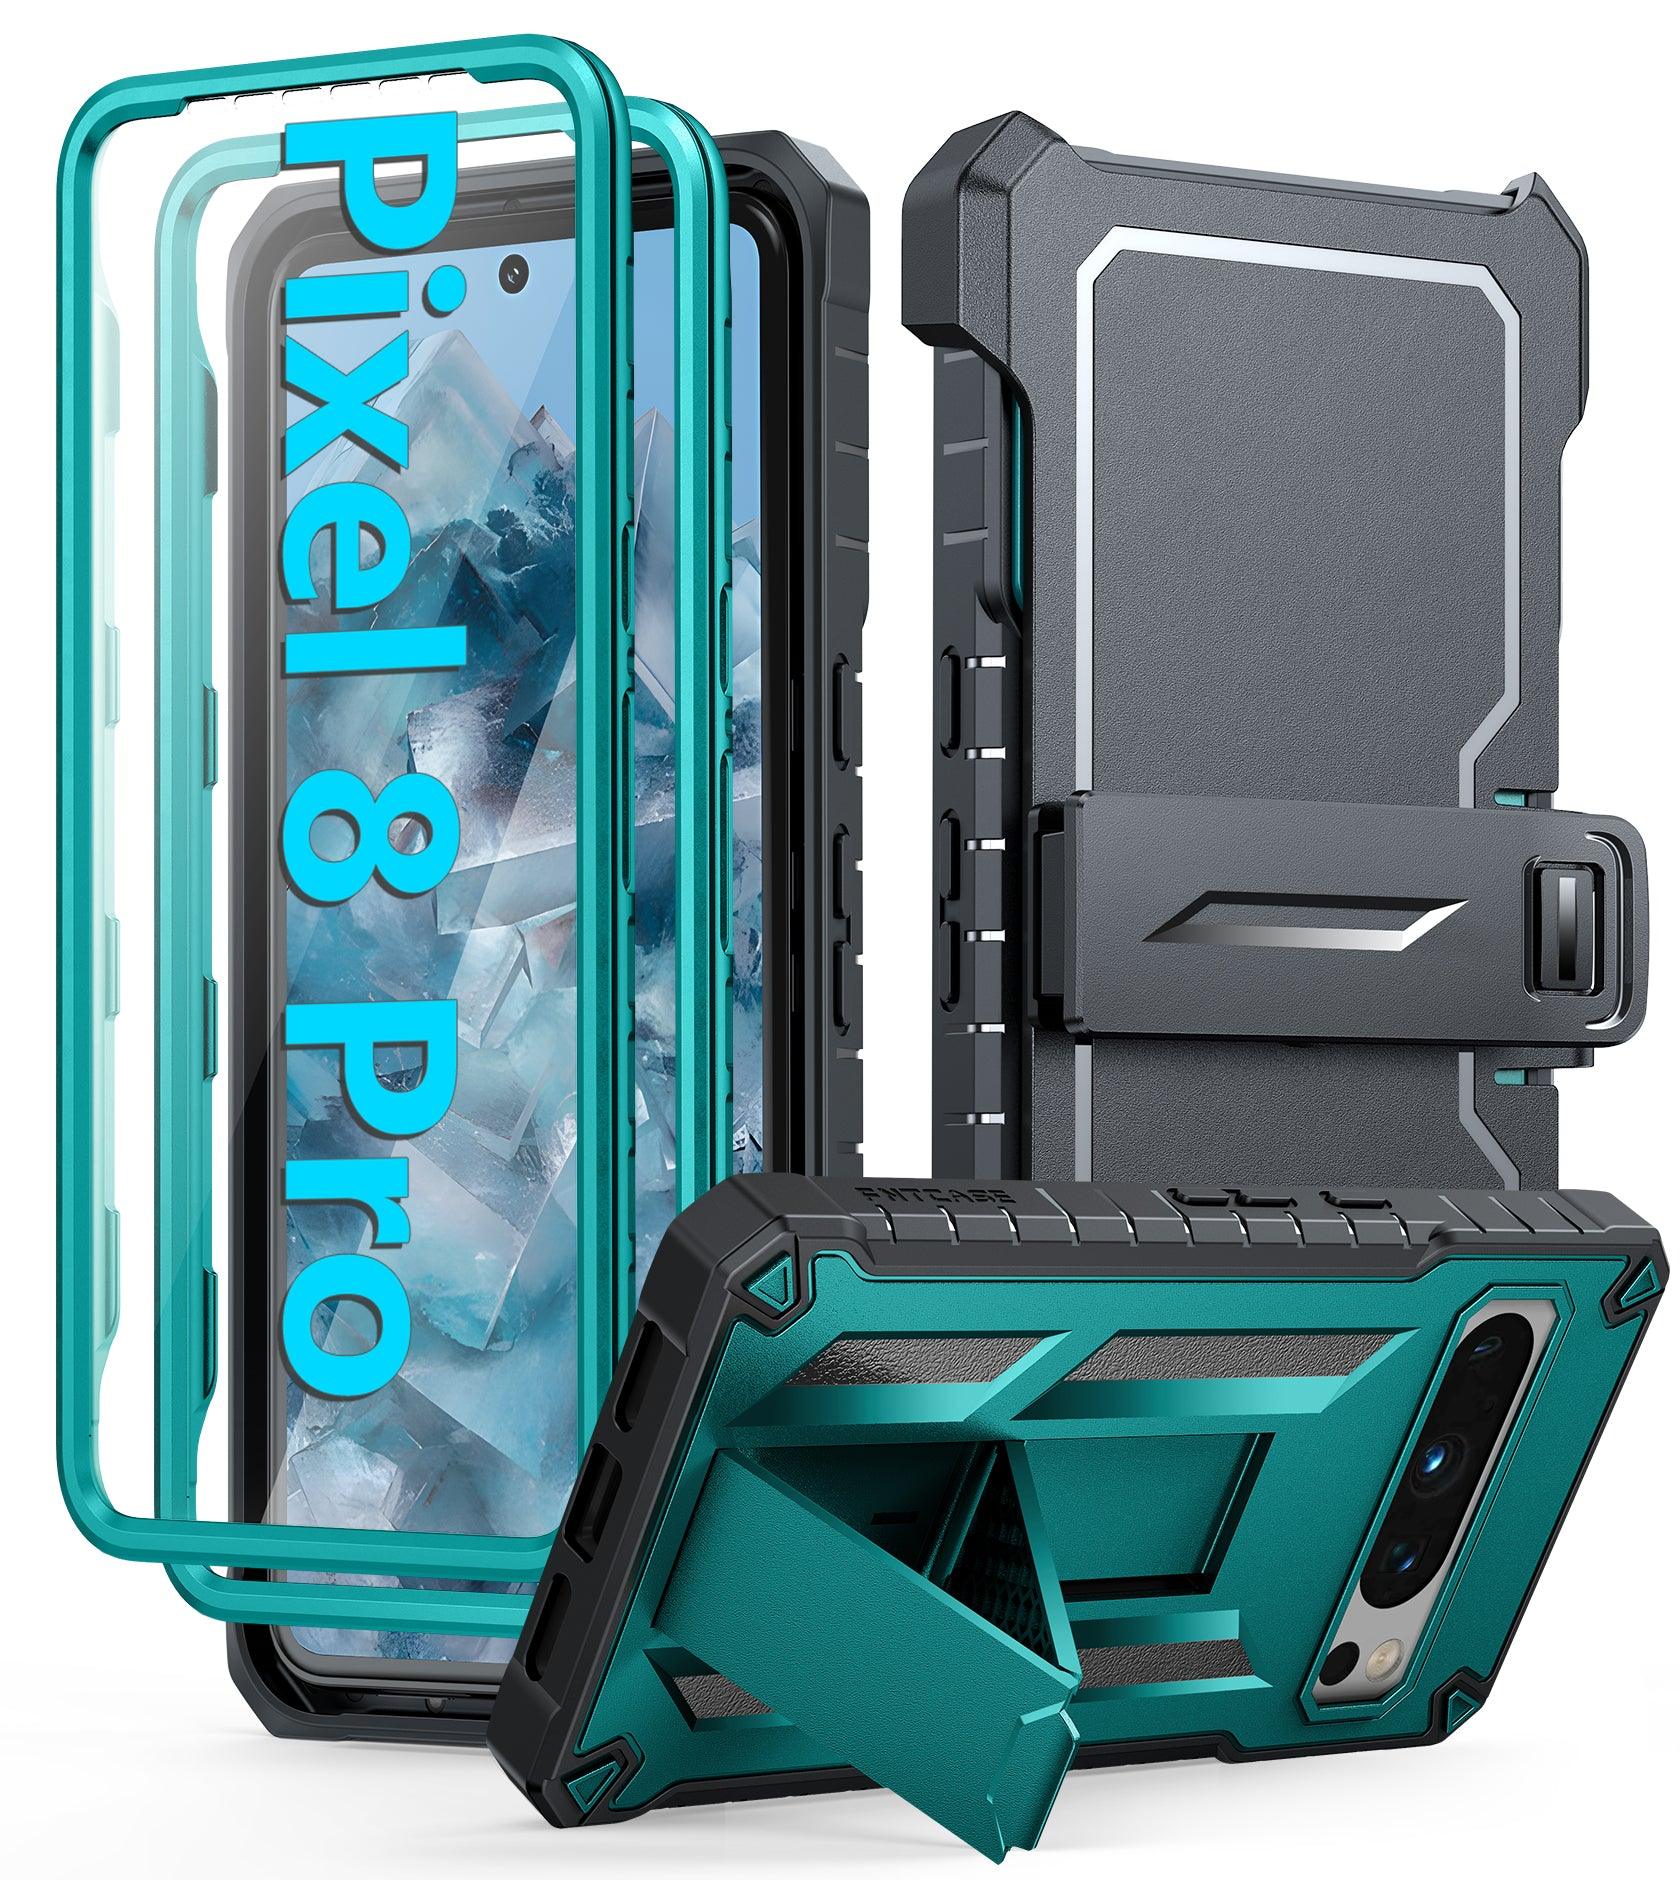 Pixel 8 Pro Full-body Dual Layer Rugged Military Shockproof Protective Phone Case with Built-in Screen Protector, Kickstand, and Belt-clip Holster - FNTCASE OFFICIAL